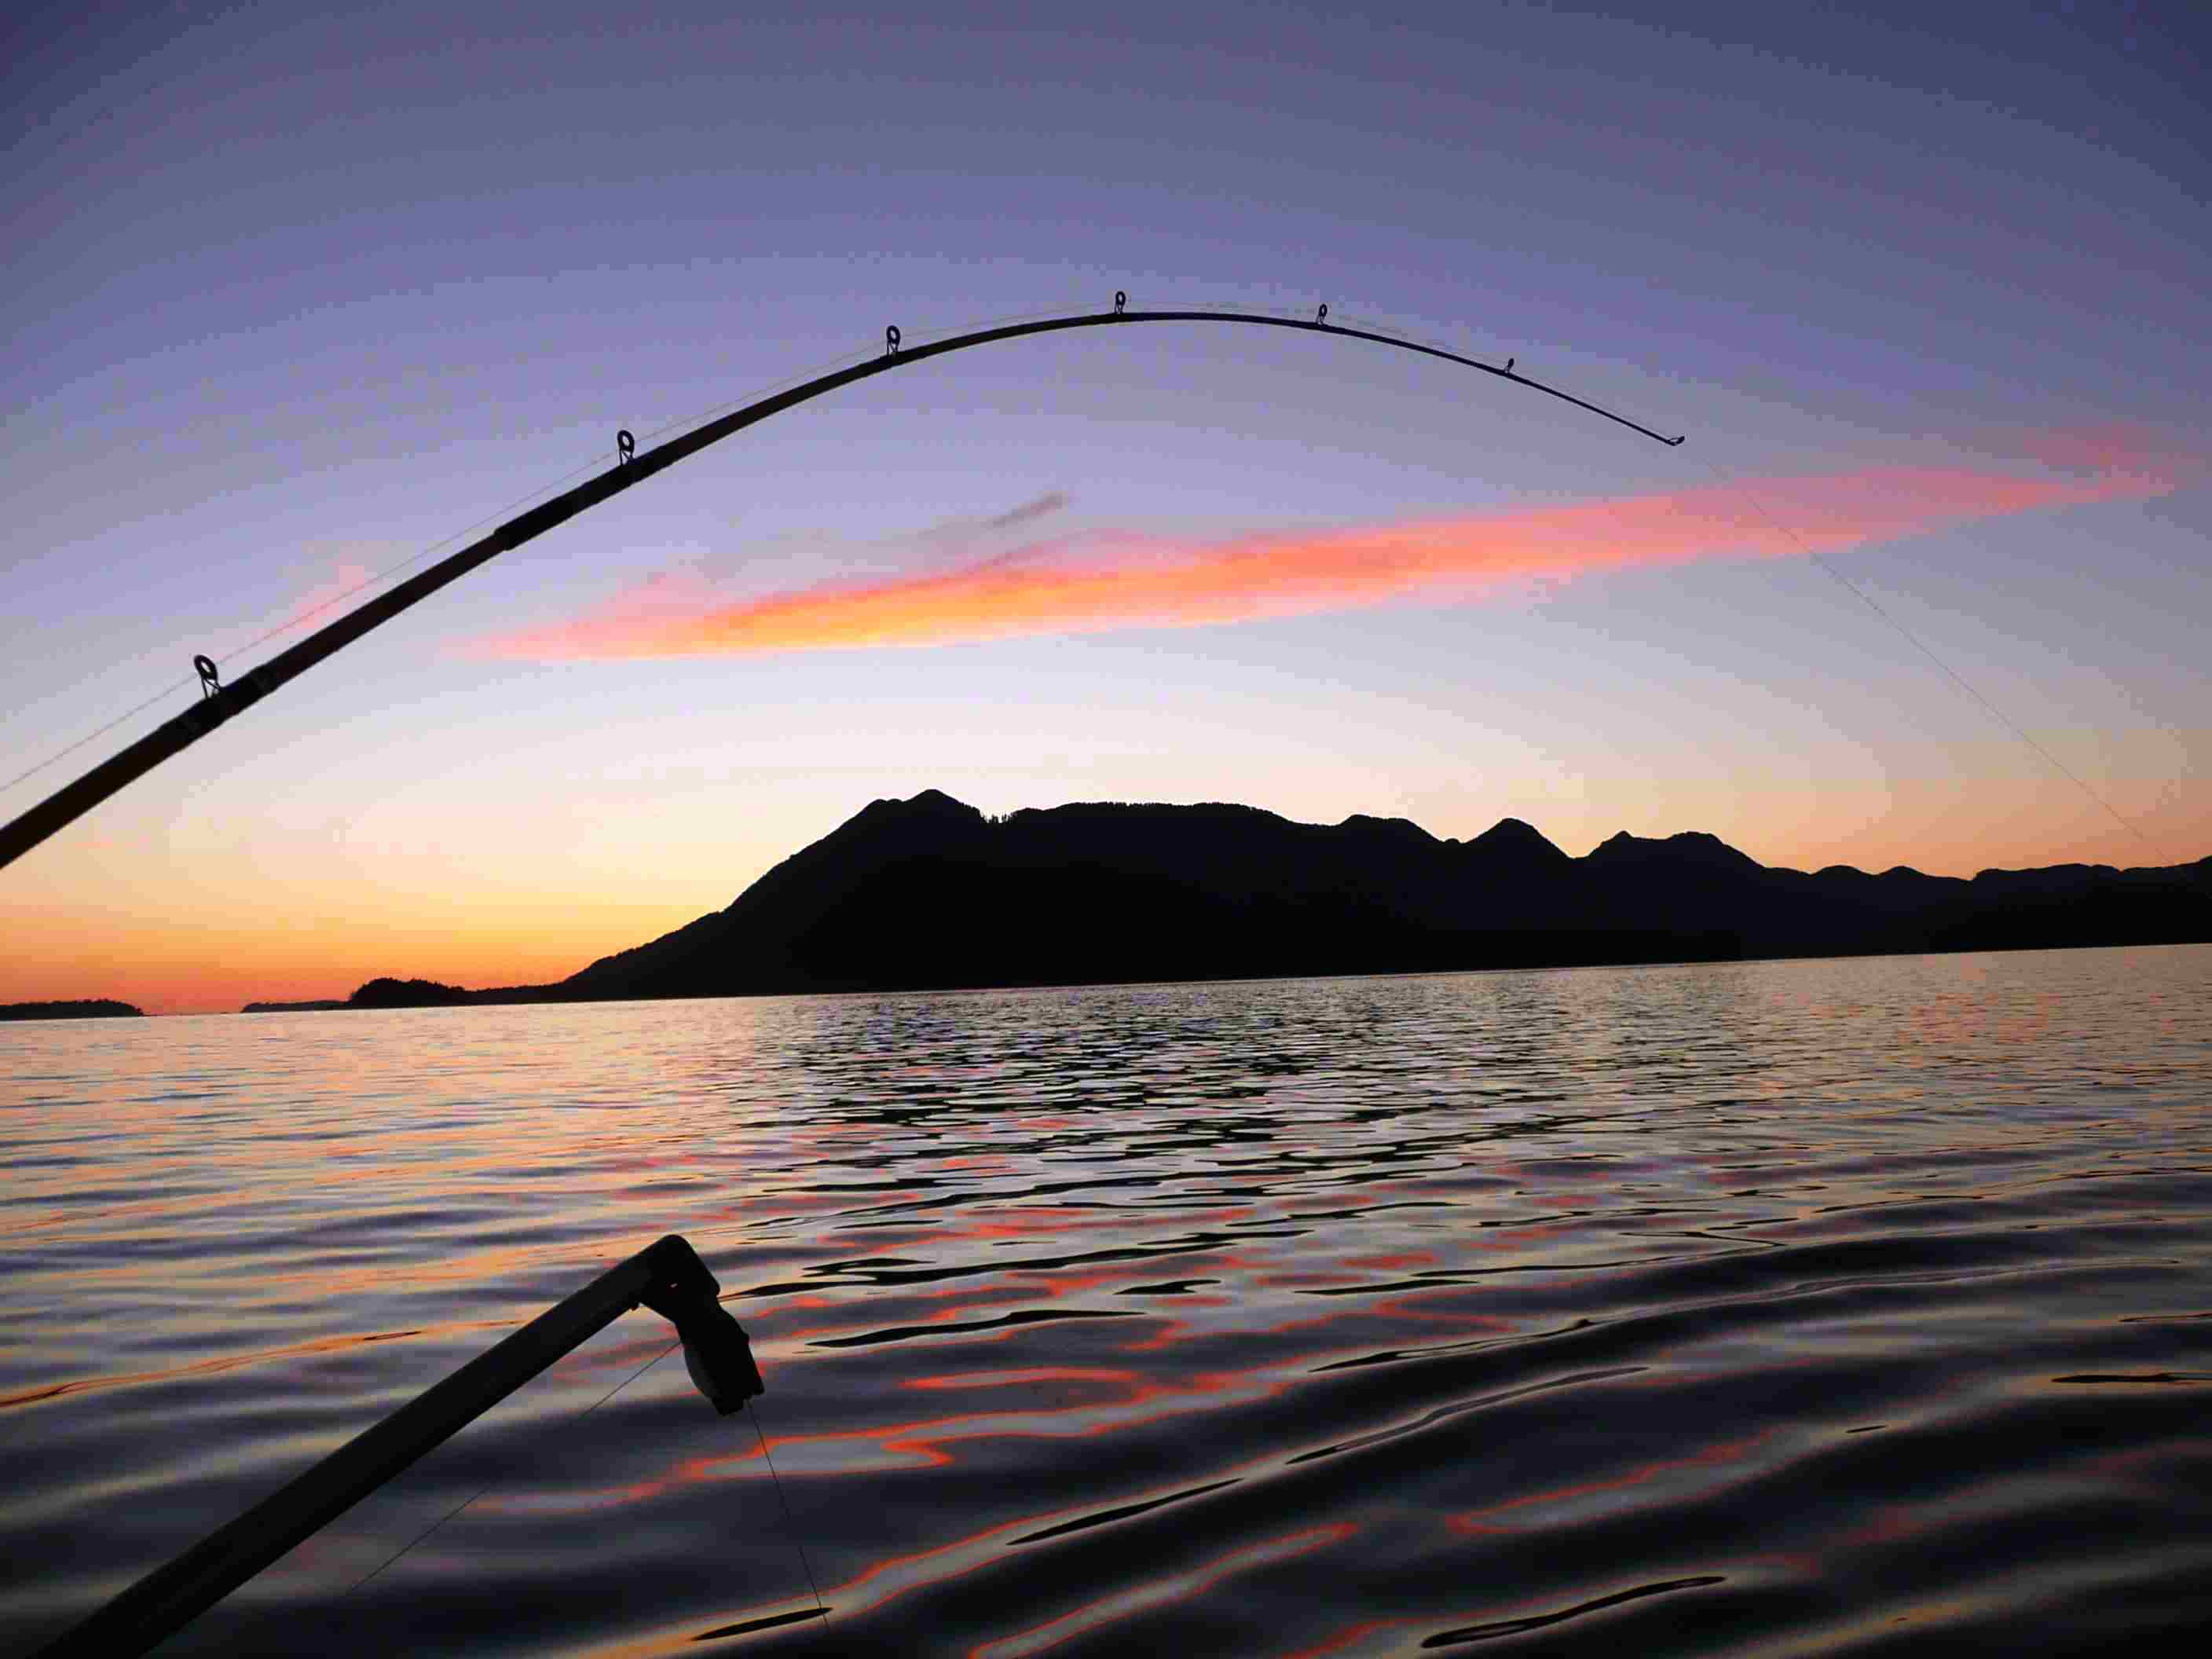 Free download Fishing Rods In Sunset Wallpaper Picture 275 Wallpaper with 2816x2112 [2816x2112] for your Desktop, Mobile & Tablet. Explore Fisherman Wallpaper Background. Fishing Wallpaper, Wallpaper Borders Fishing, Desktop Wallpaper Fishing